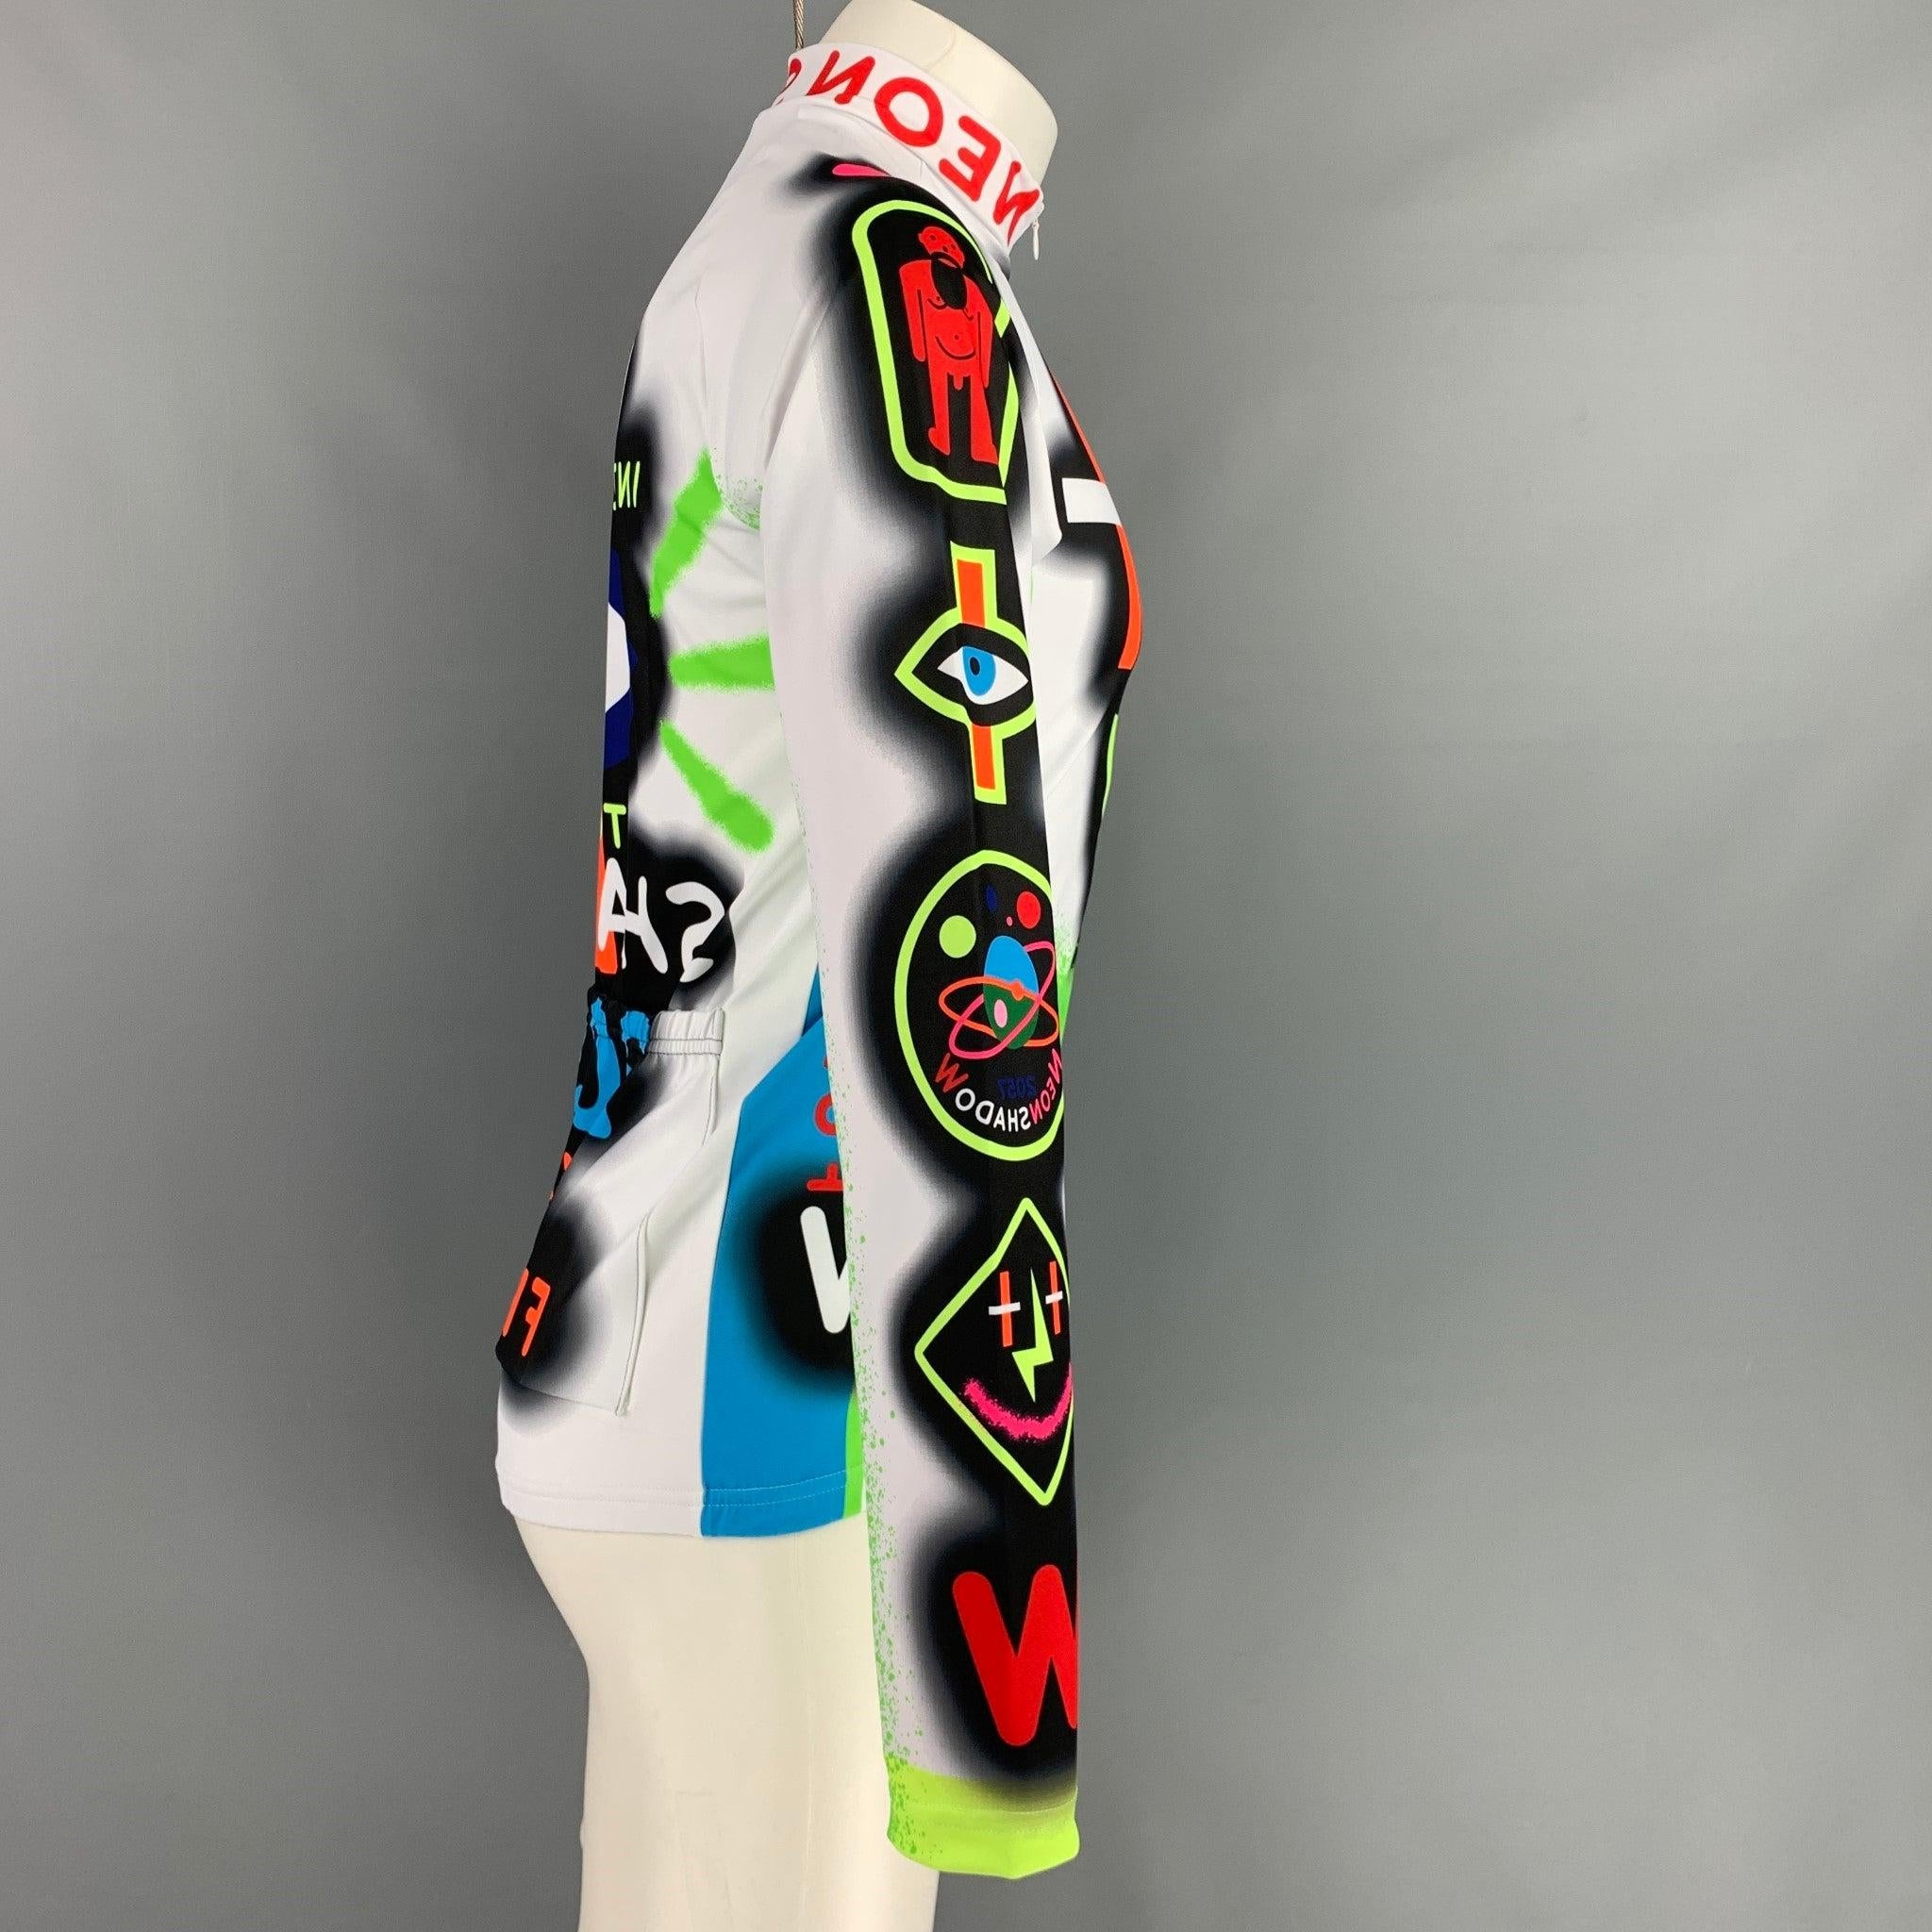 Walter Van Beirendonck Cycle Biker Jersey Pullover Top from Spring Summer 2022 Neon Shadow collection. Features a stretch material quarter zip graphic print design, collar and back pockets.Introduced as part of Walter Van Beirendonck’s W<